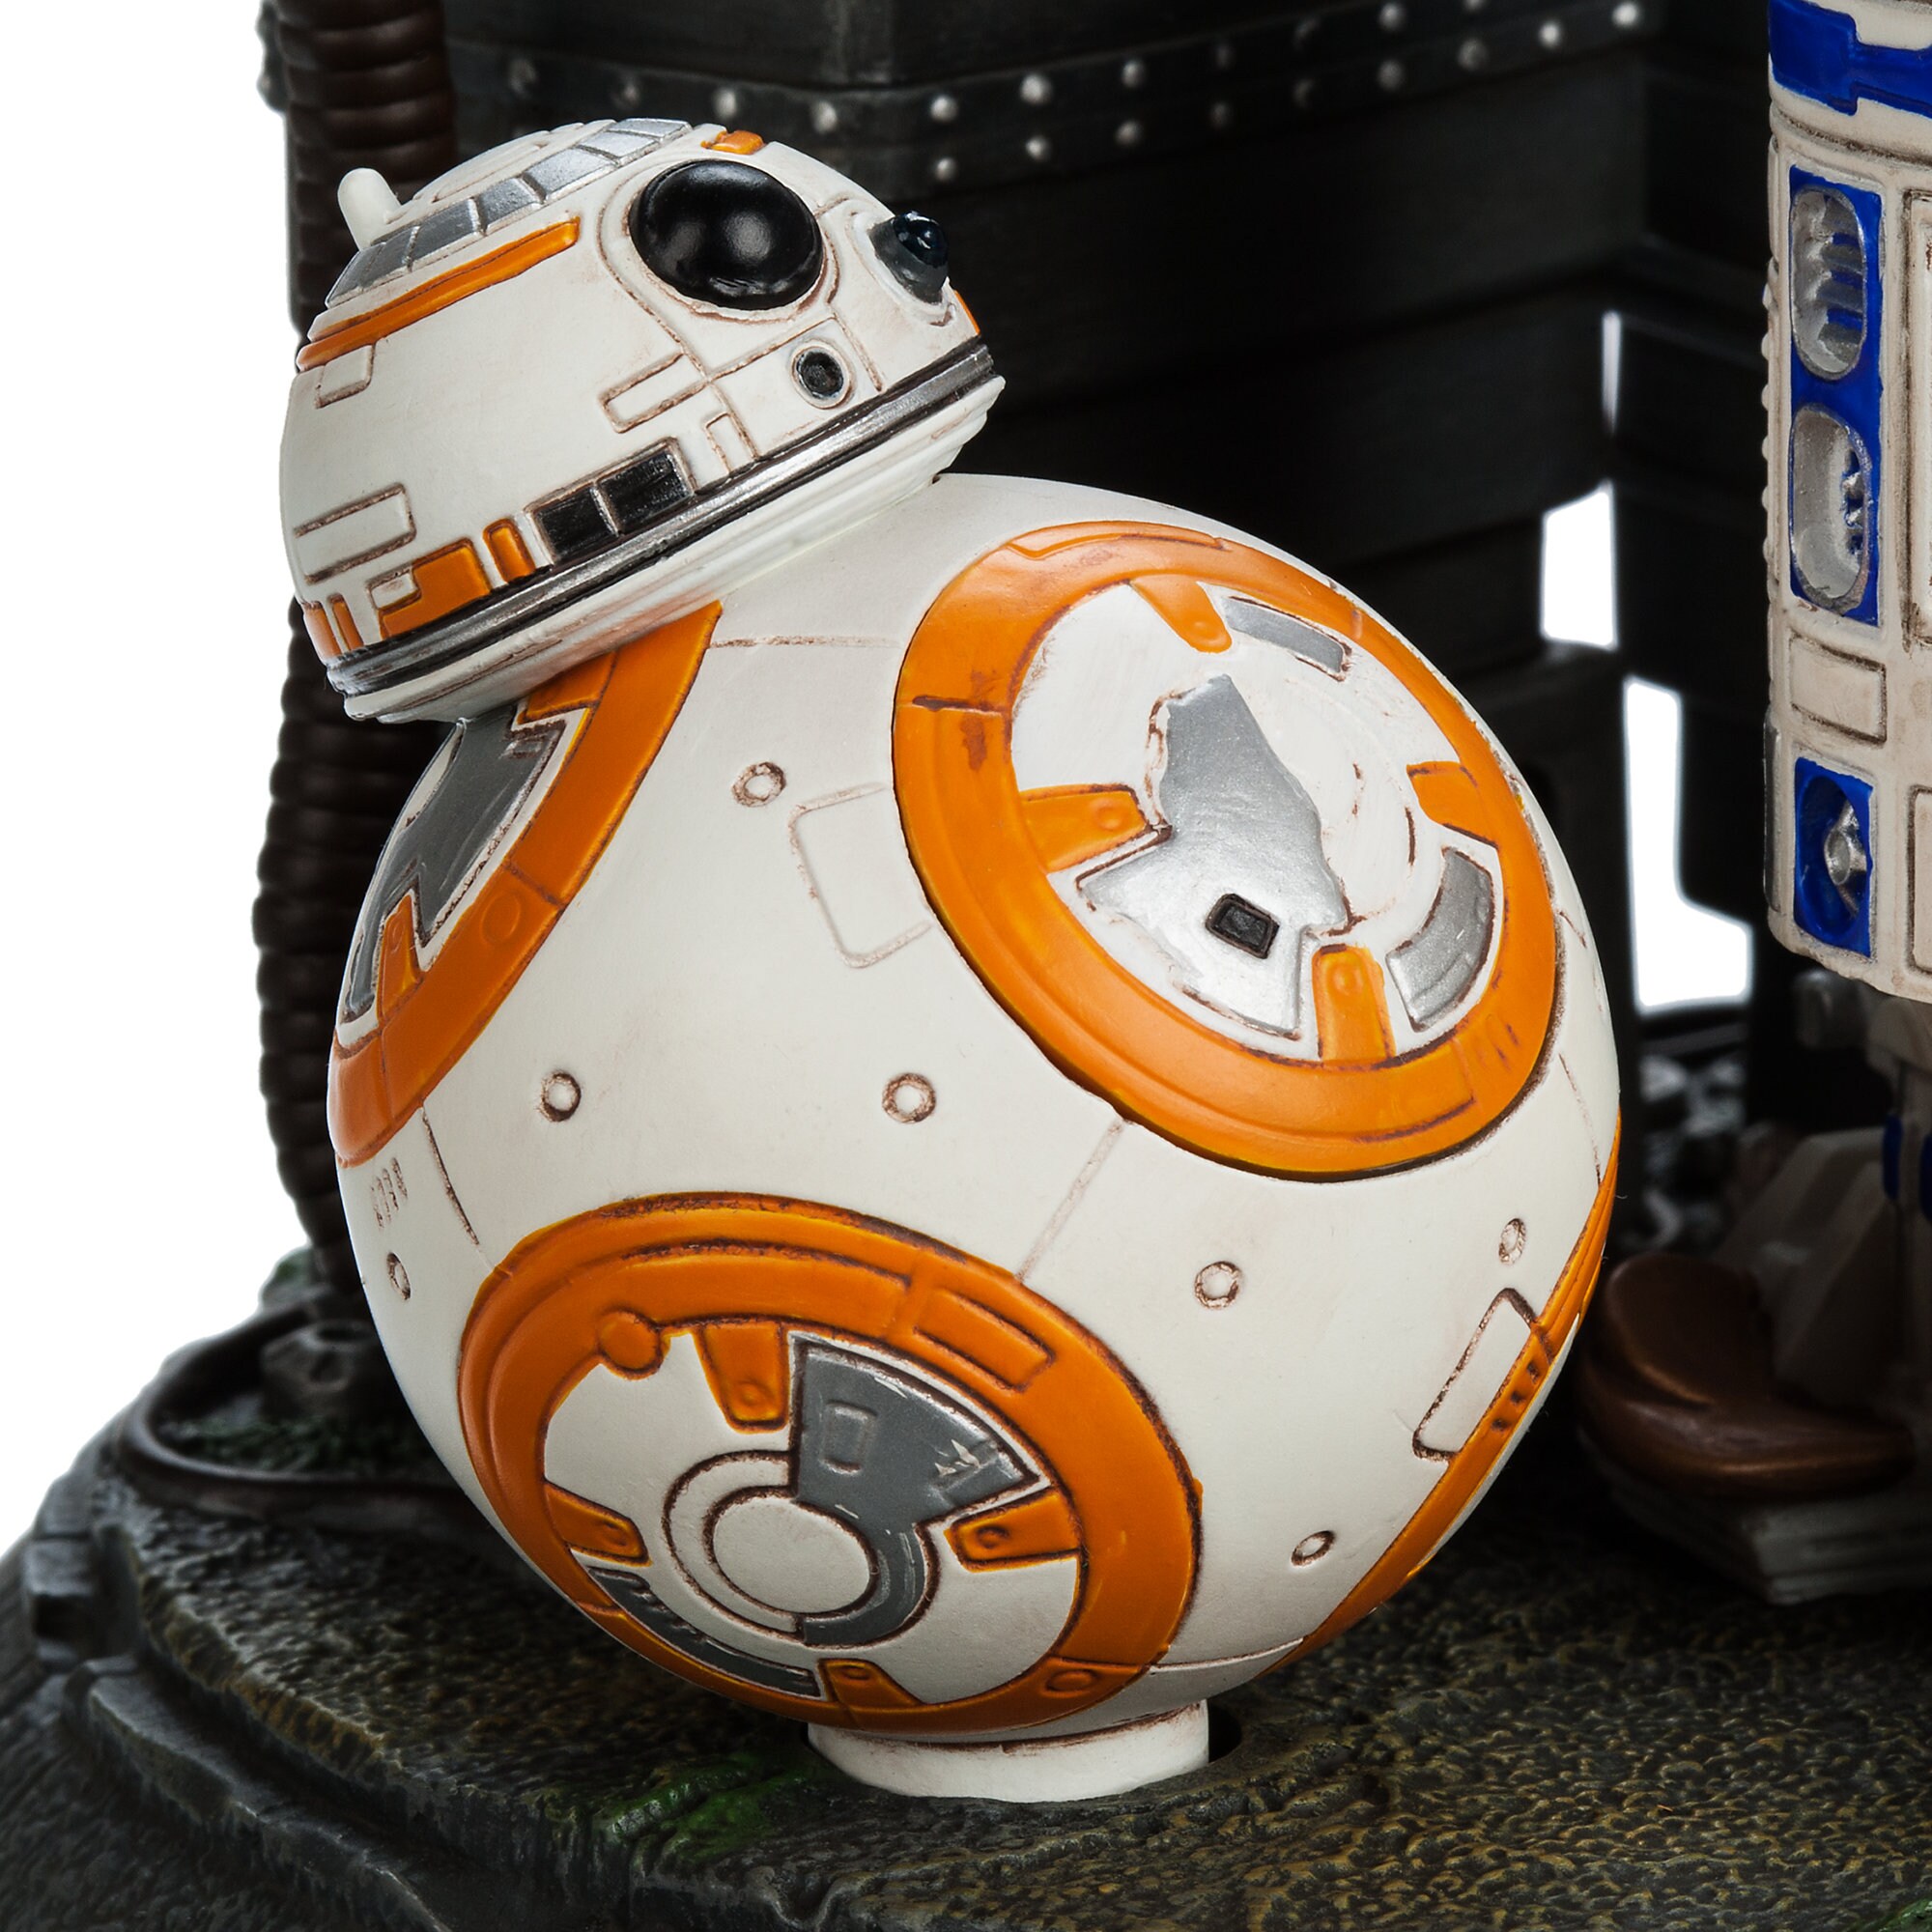 R2-D2 and BB-8 Astromech Droids Figurine - Star Wars: The Force Awakens